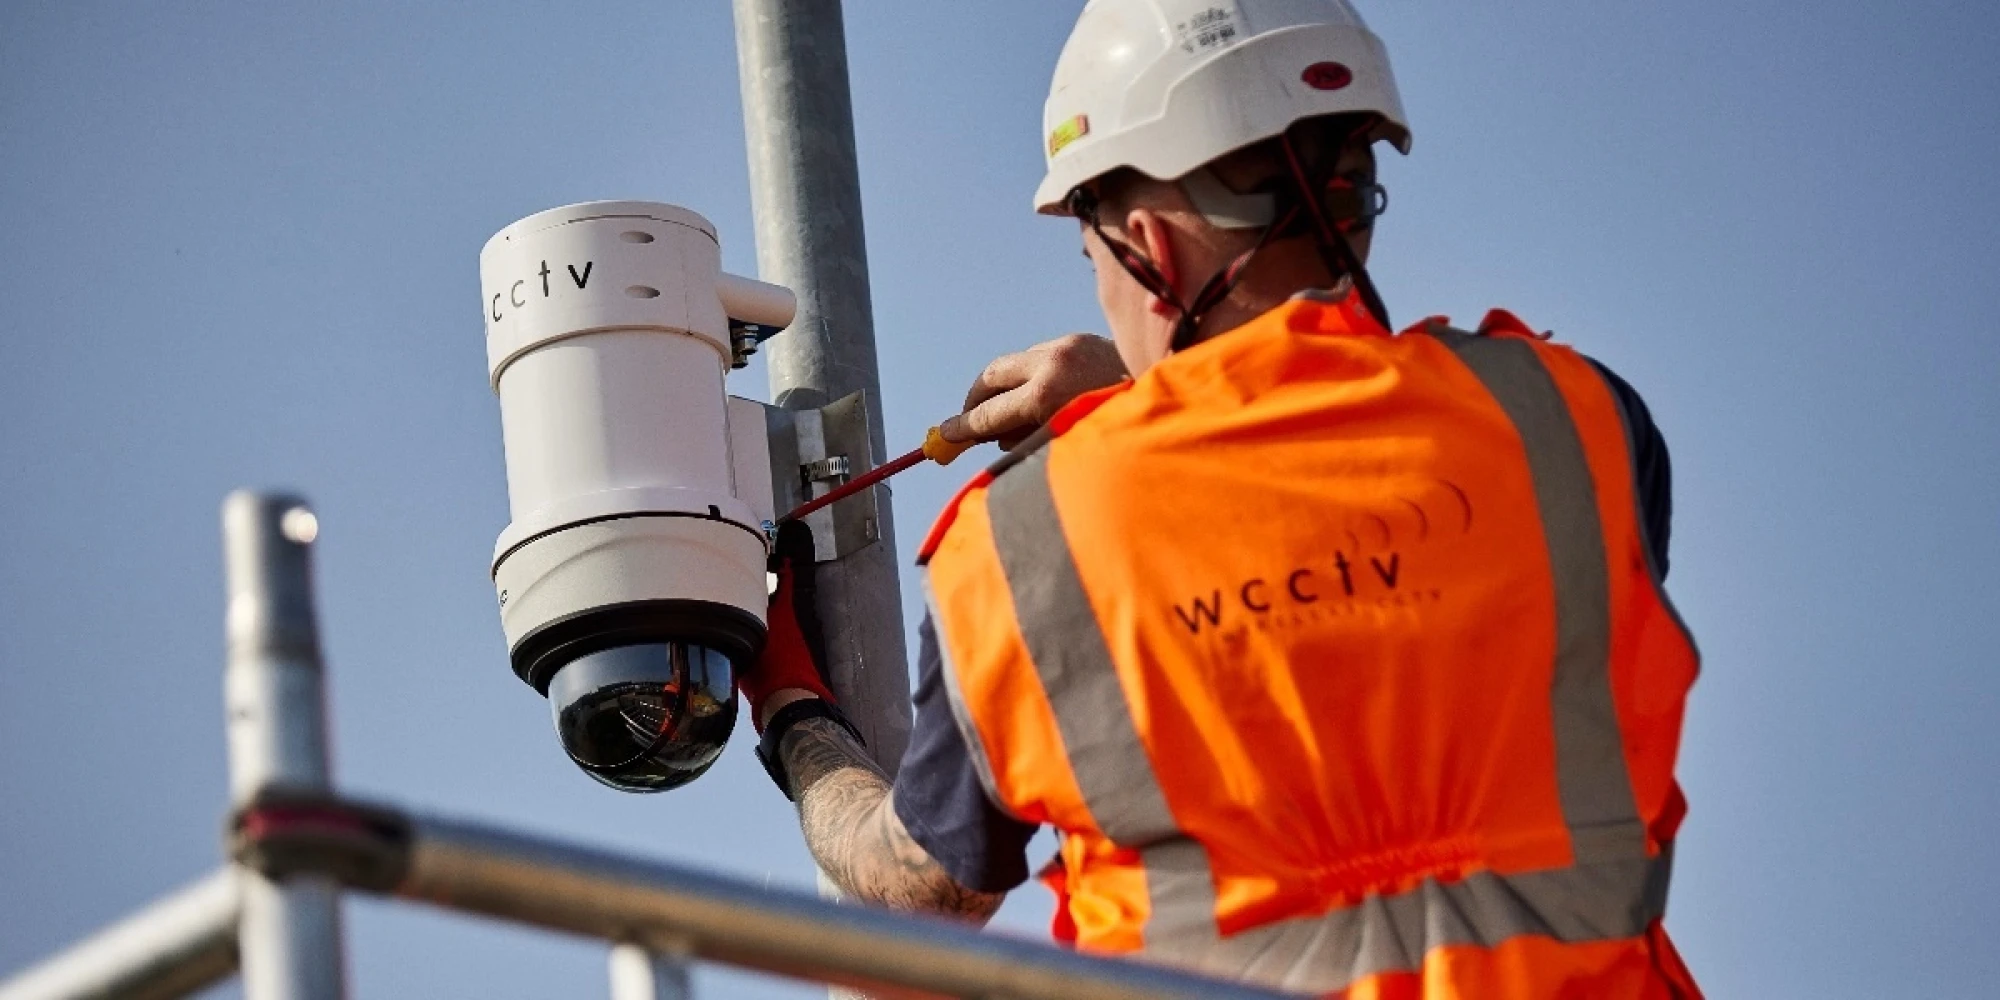 WCCTV Engineer Attaching a Redeployable CCTV Camera to a Pole